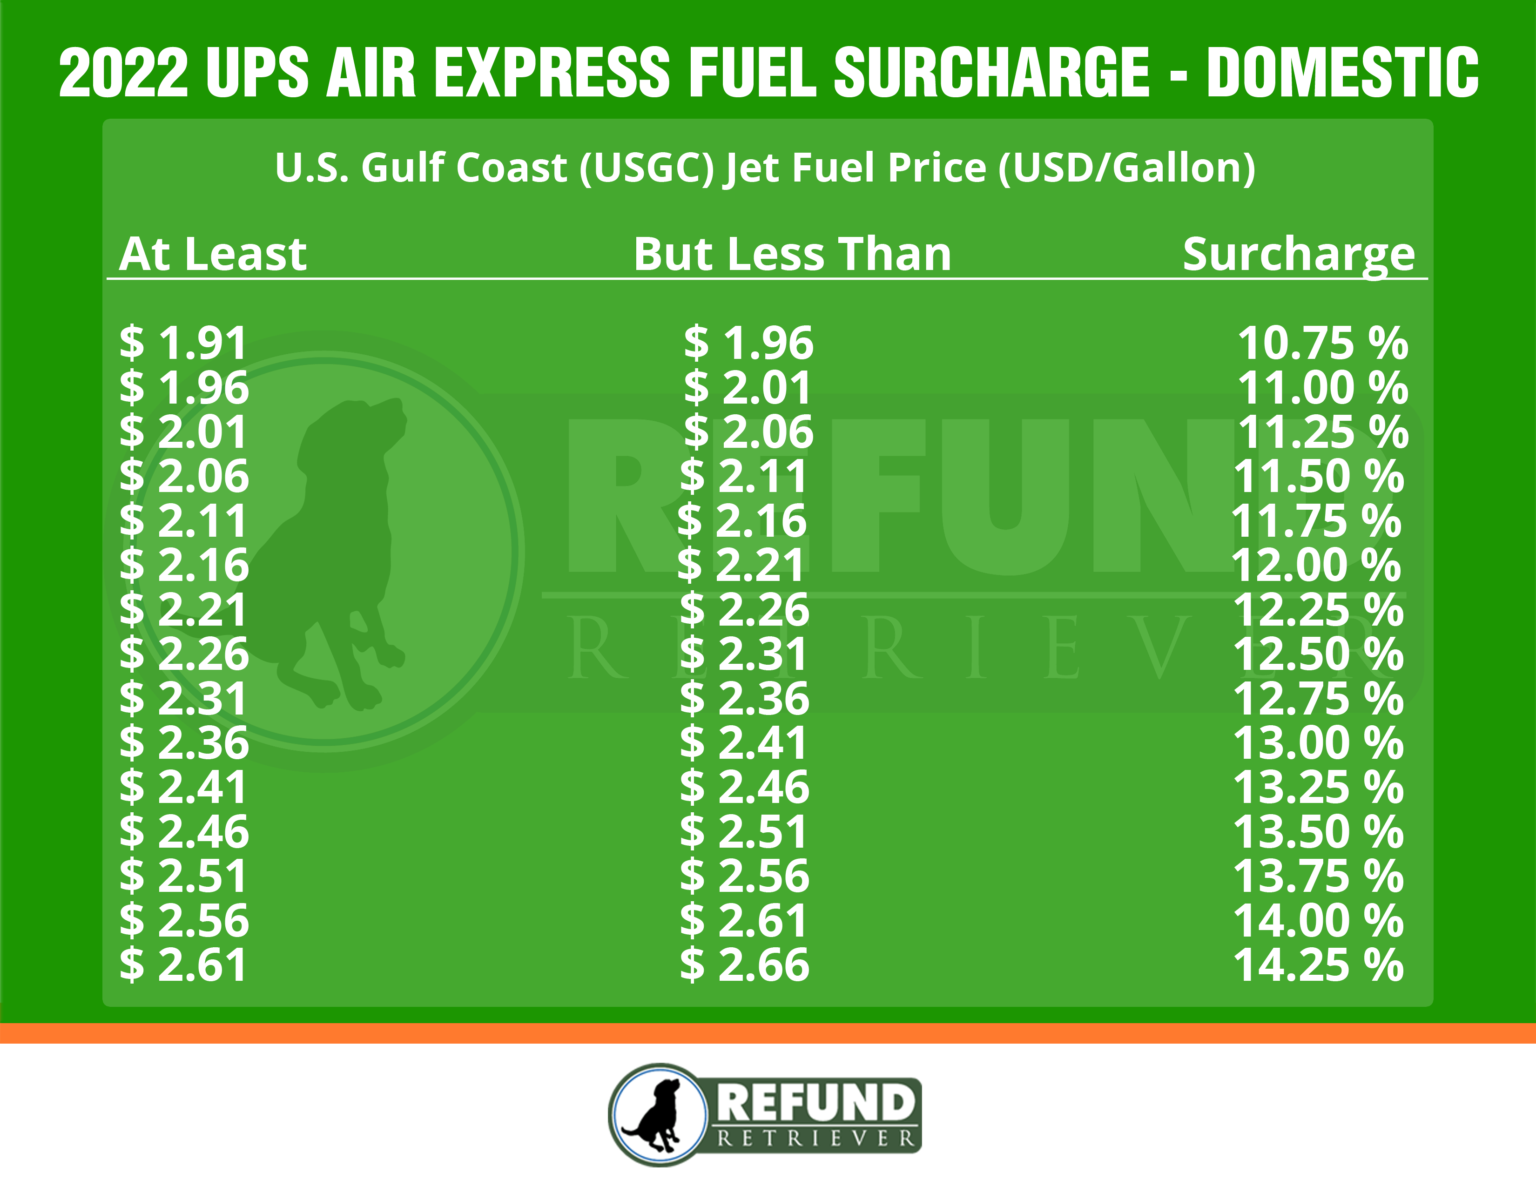 UPS Fuel Surcharges Impact and Analysis